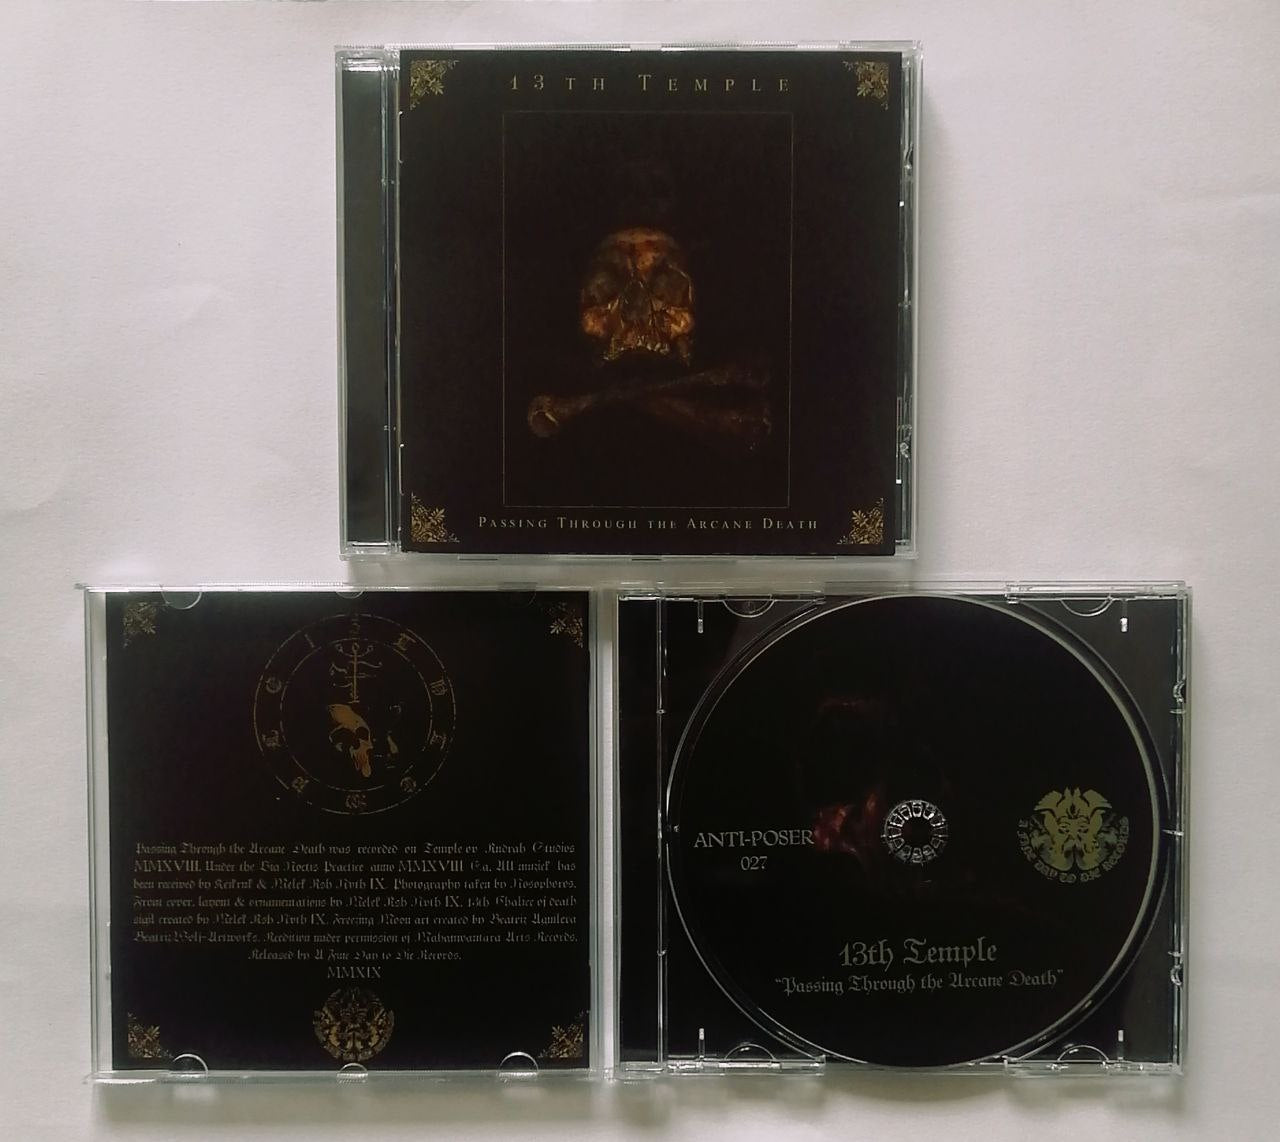 13th Temple (Chile) "Passing Through The Arcane Death" - CDs